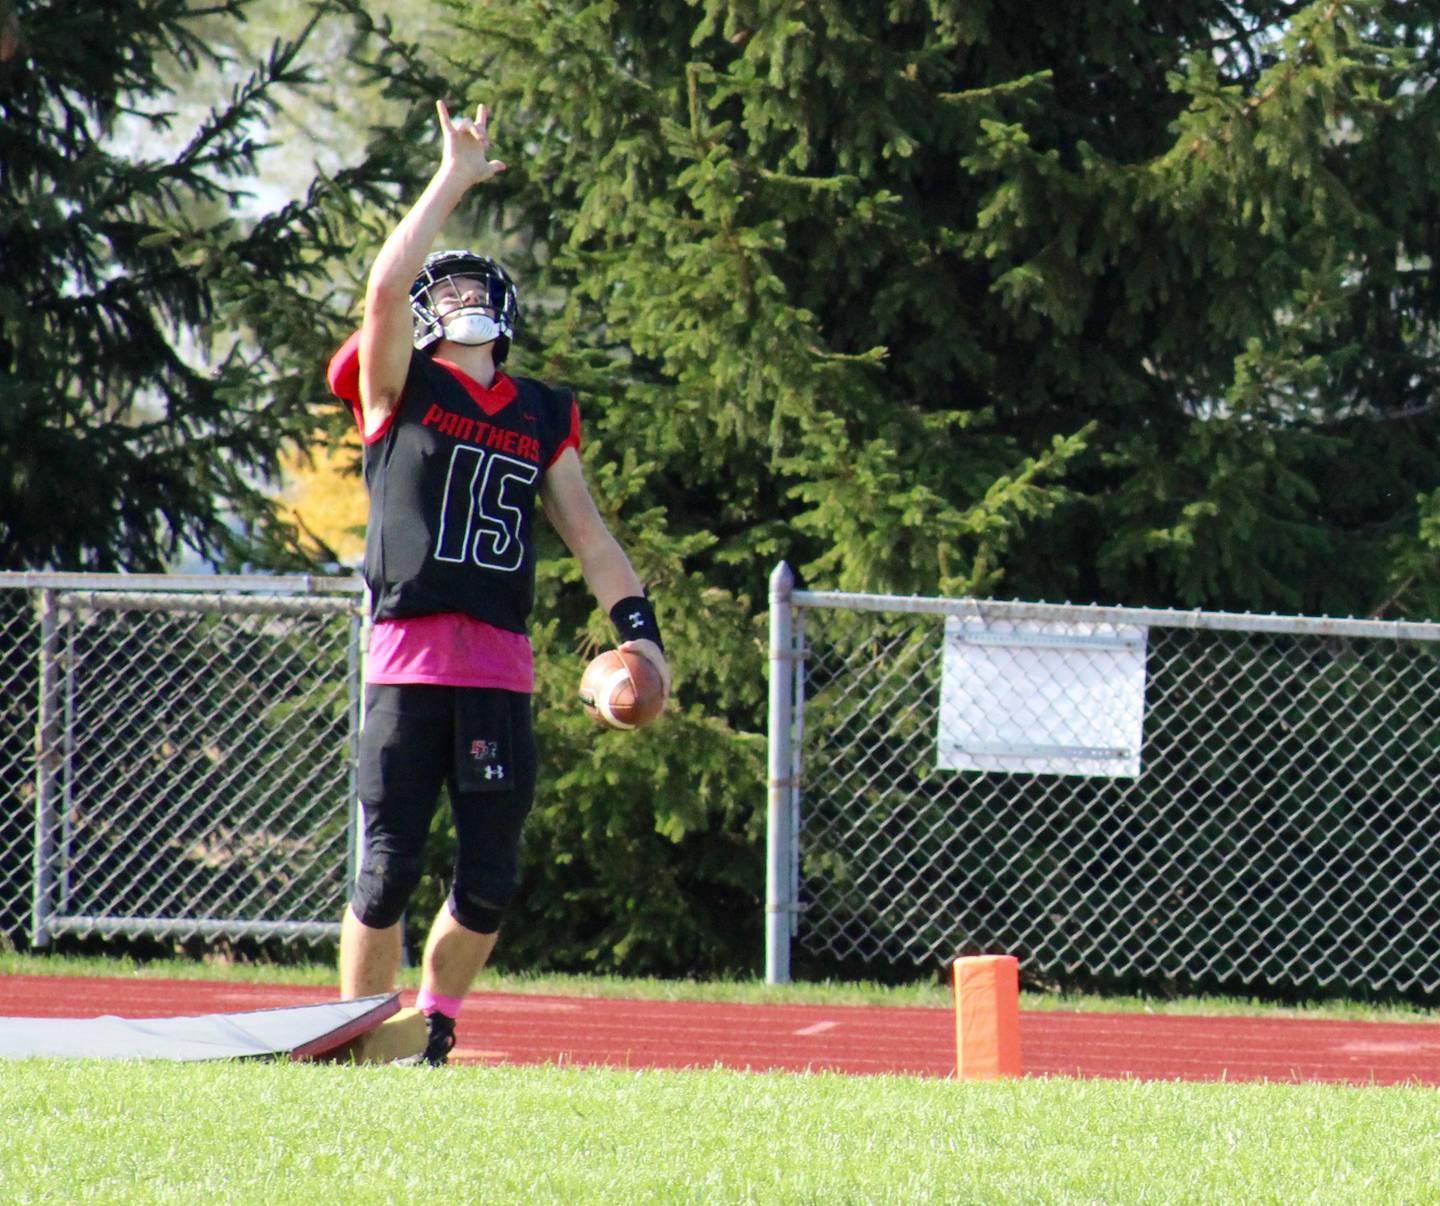 Mason Misfeldt (15) signals his touchdown   which came on a broken play in the second quarter. Misfeldt caught a pass from quarterback Kolby Franks, was hit and dropped the ball, went back and scooped up the fumble, then went on a breakaway run for the sidelines, completing the 37-yard scoring play.